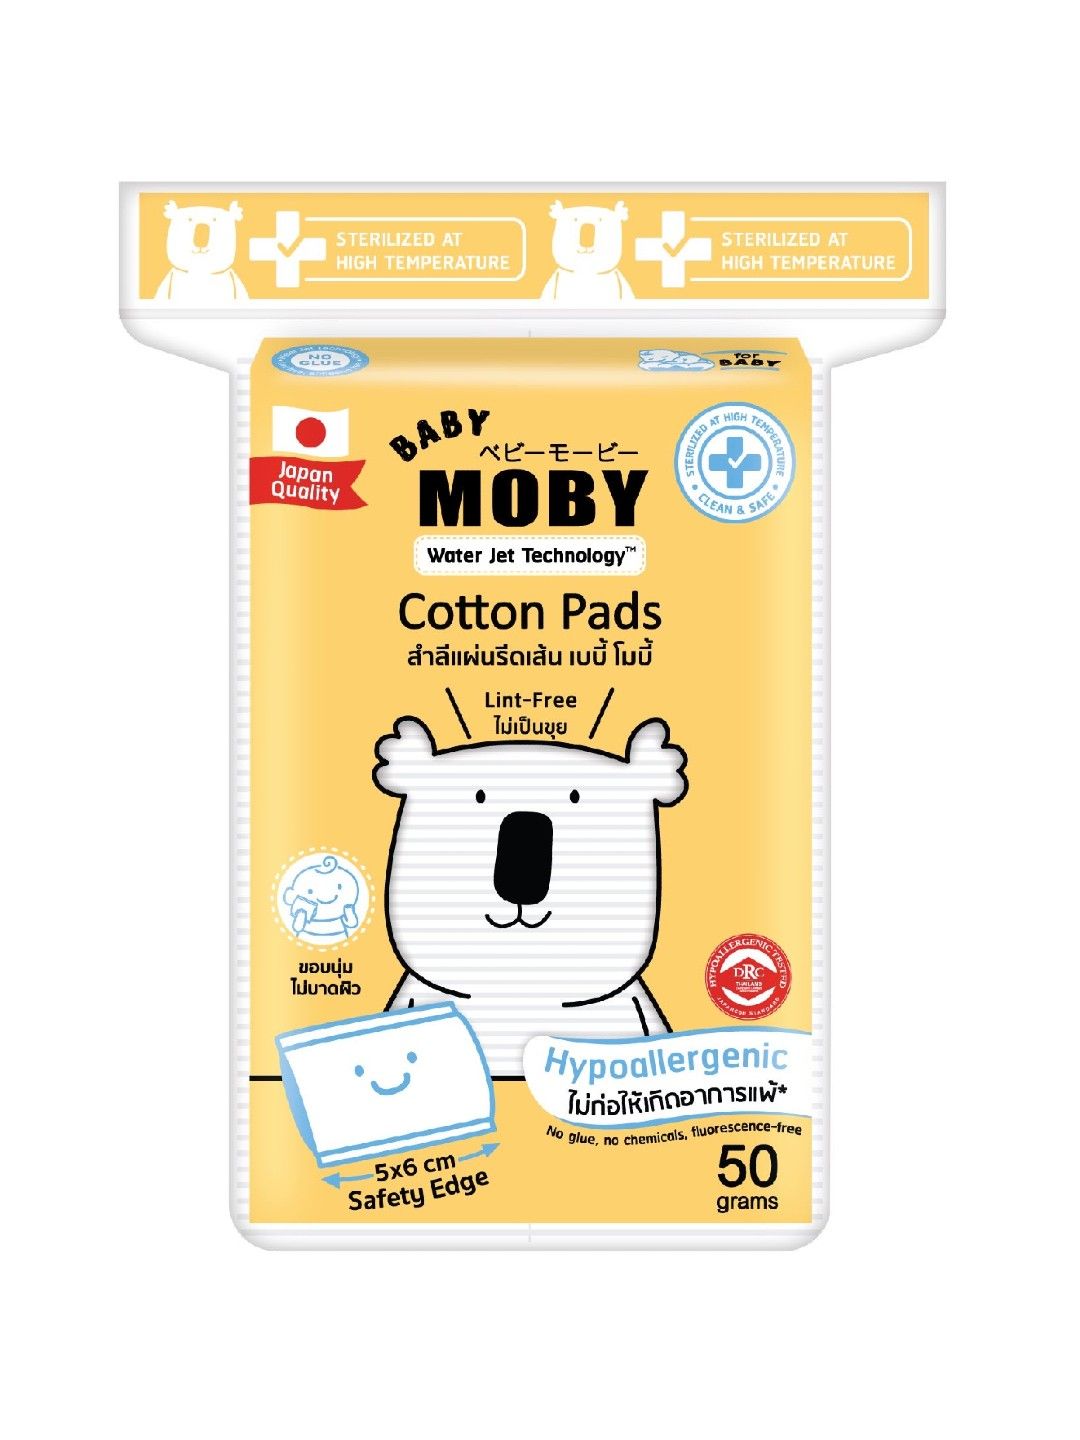 Baby Moby Cotton Pads (50g) (White- Image 1)